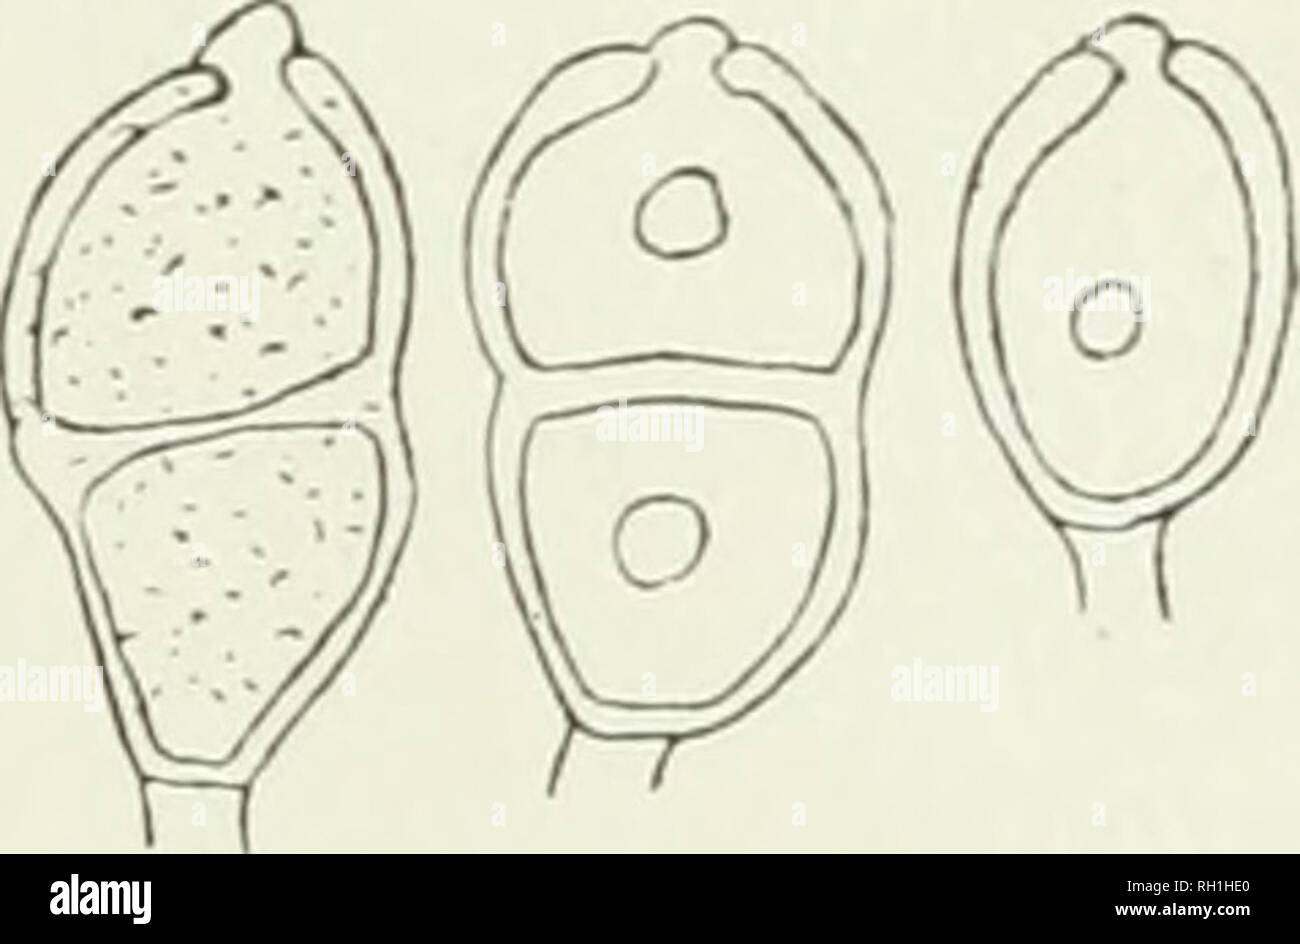 . The British rust fungi (Uredinales), their biology and classification. Uredineae. Fig. 160. P. Saxifragae. Te- leutospores, a, on 8. nmbrosa (Ireland), b, on S. steUaris (Lochnagar). Distribution : Central and Western Europe.. 84. Puccinia Fazschkei Dietel. Puccinia I'a:sc/dei Diet, in Hedwig. 1891, p. 103 ; Ber. deutsch. Bot. Gesell. ix. 44, pi. 3, f. 15. Sacc. Syll. xi. 185. Sydow, Monogr. i. 503, f. 411. Fischer, Ured. Schweiz, p. 148, f. 113. Trans. Brit. Myc. Soc. iii. 123. Teleutospores. Sori epiphyllous, about ^—1 mm. wide, scattered or more often in orbicular groups 2—3 mm. diam., a  Stock Photo